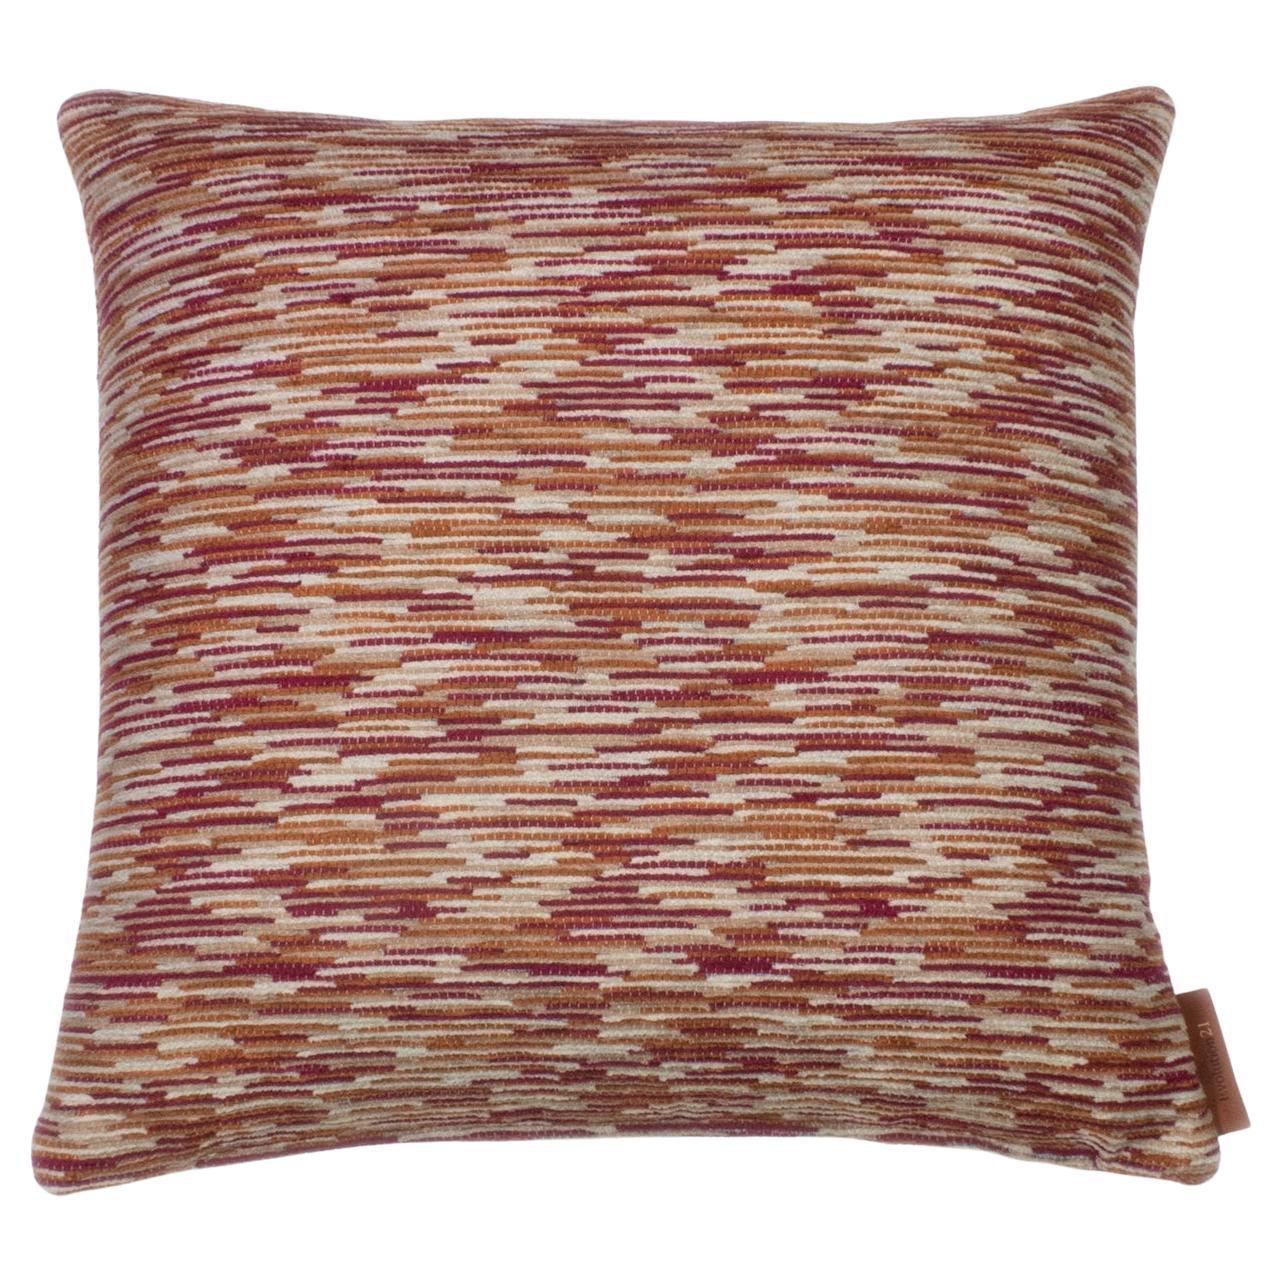 Modern Patterned Textured Pillow Multicolour "Puntacana" by Evolution21 For Sale